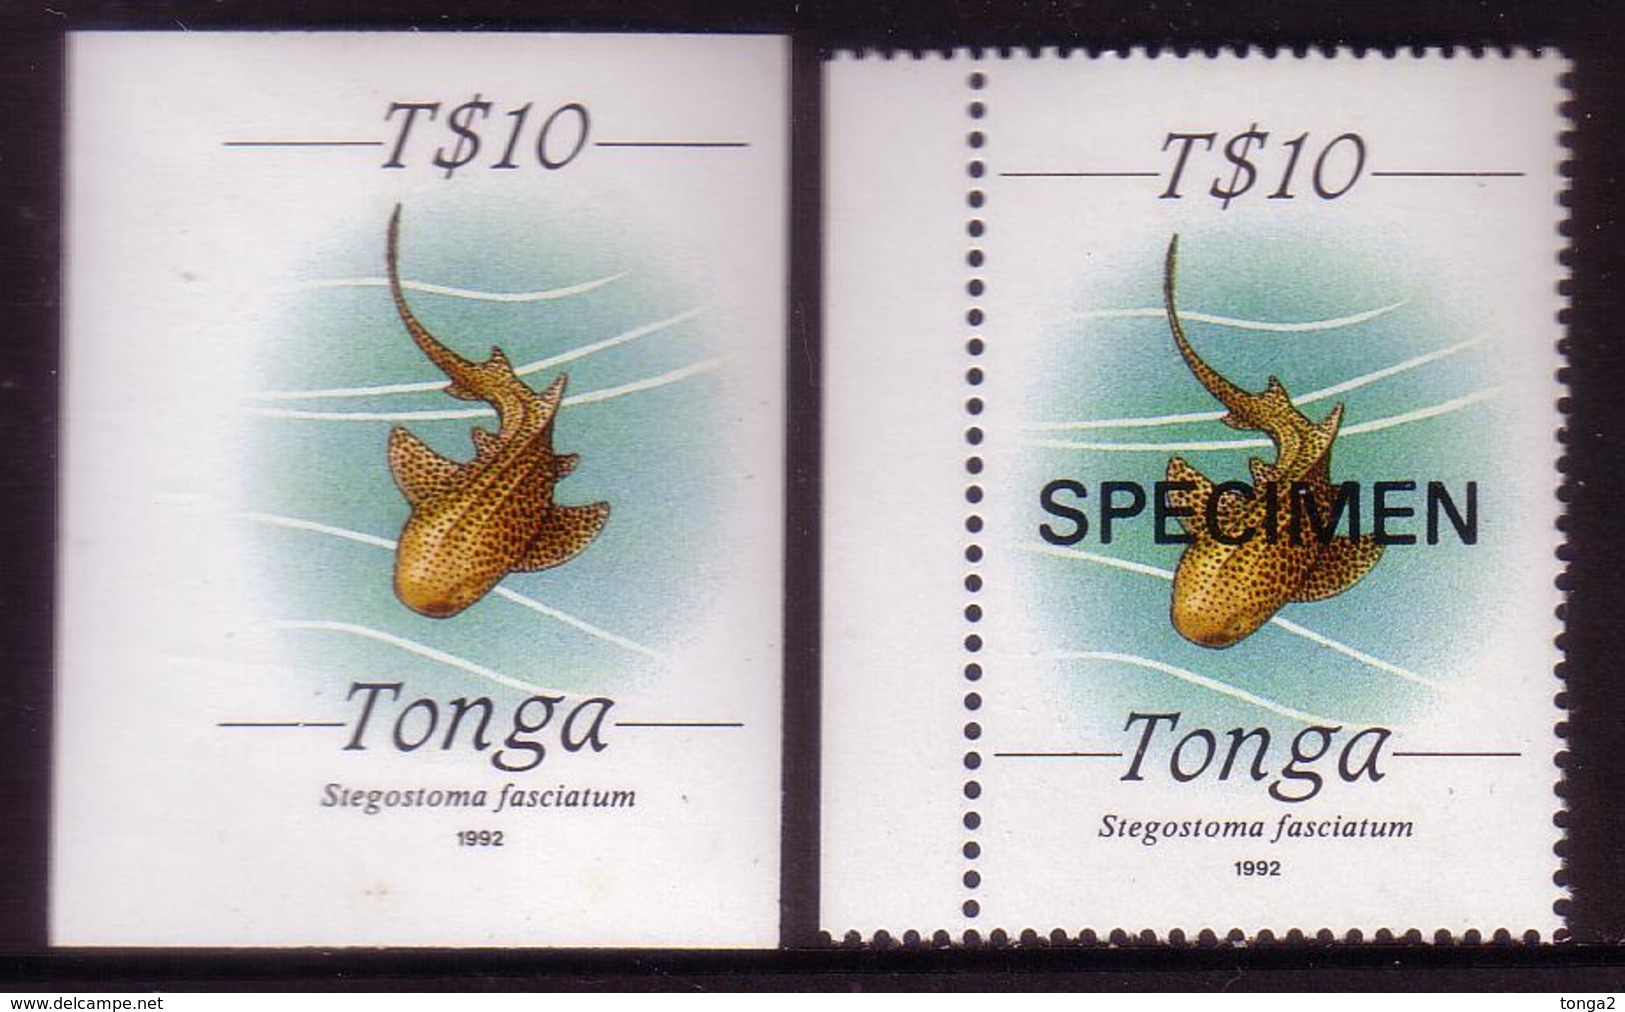 Tonga 1992 - IMPERF Plate Proof $10.00 Shark - One Sheet Of 10 Known - Rare - Matching Specimen Is Included - Tonga (1970-...)